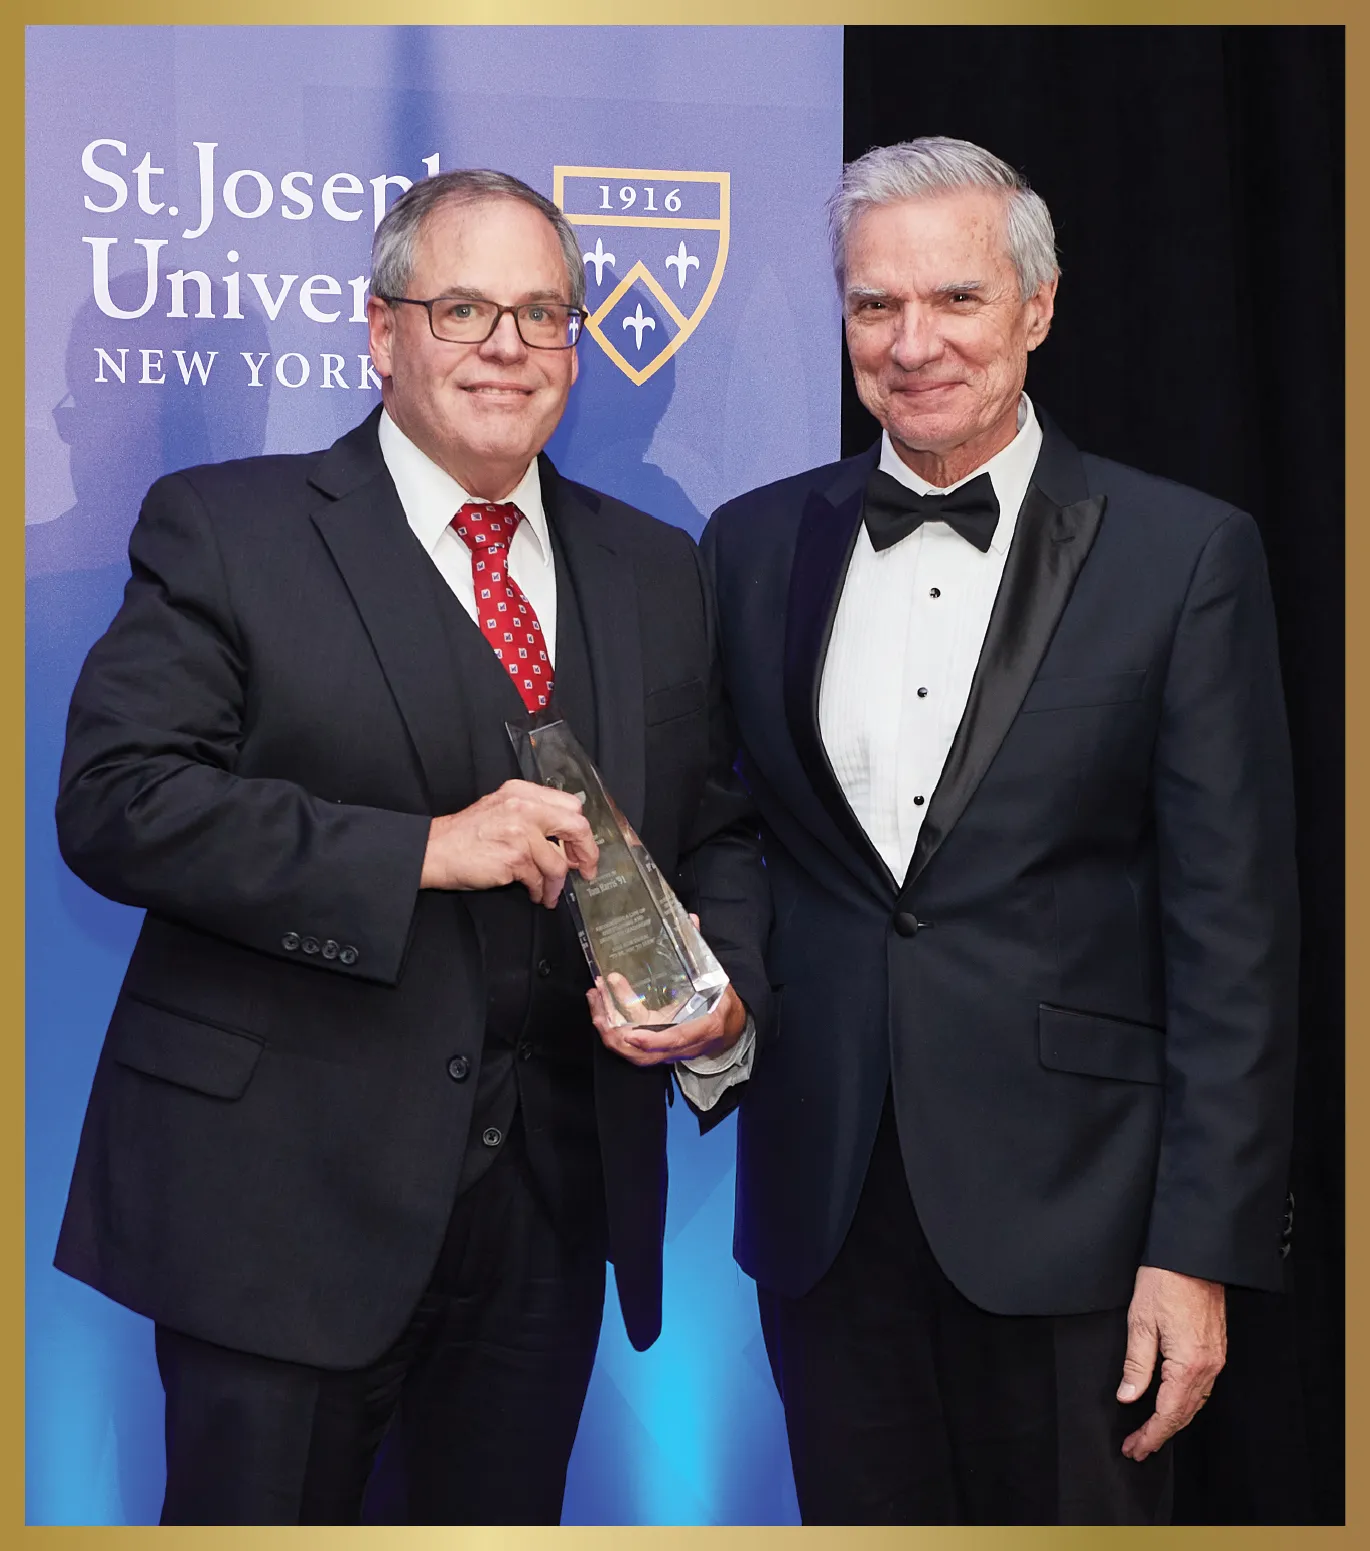 Tom Harris ’91 smiles holding a glass award and standing beside a smiling President Boomgaarden